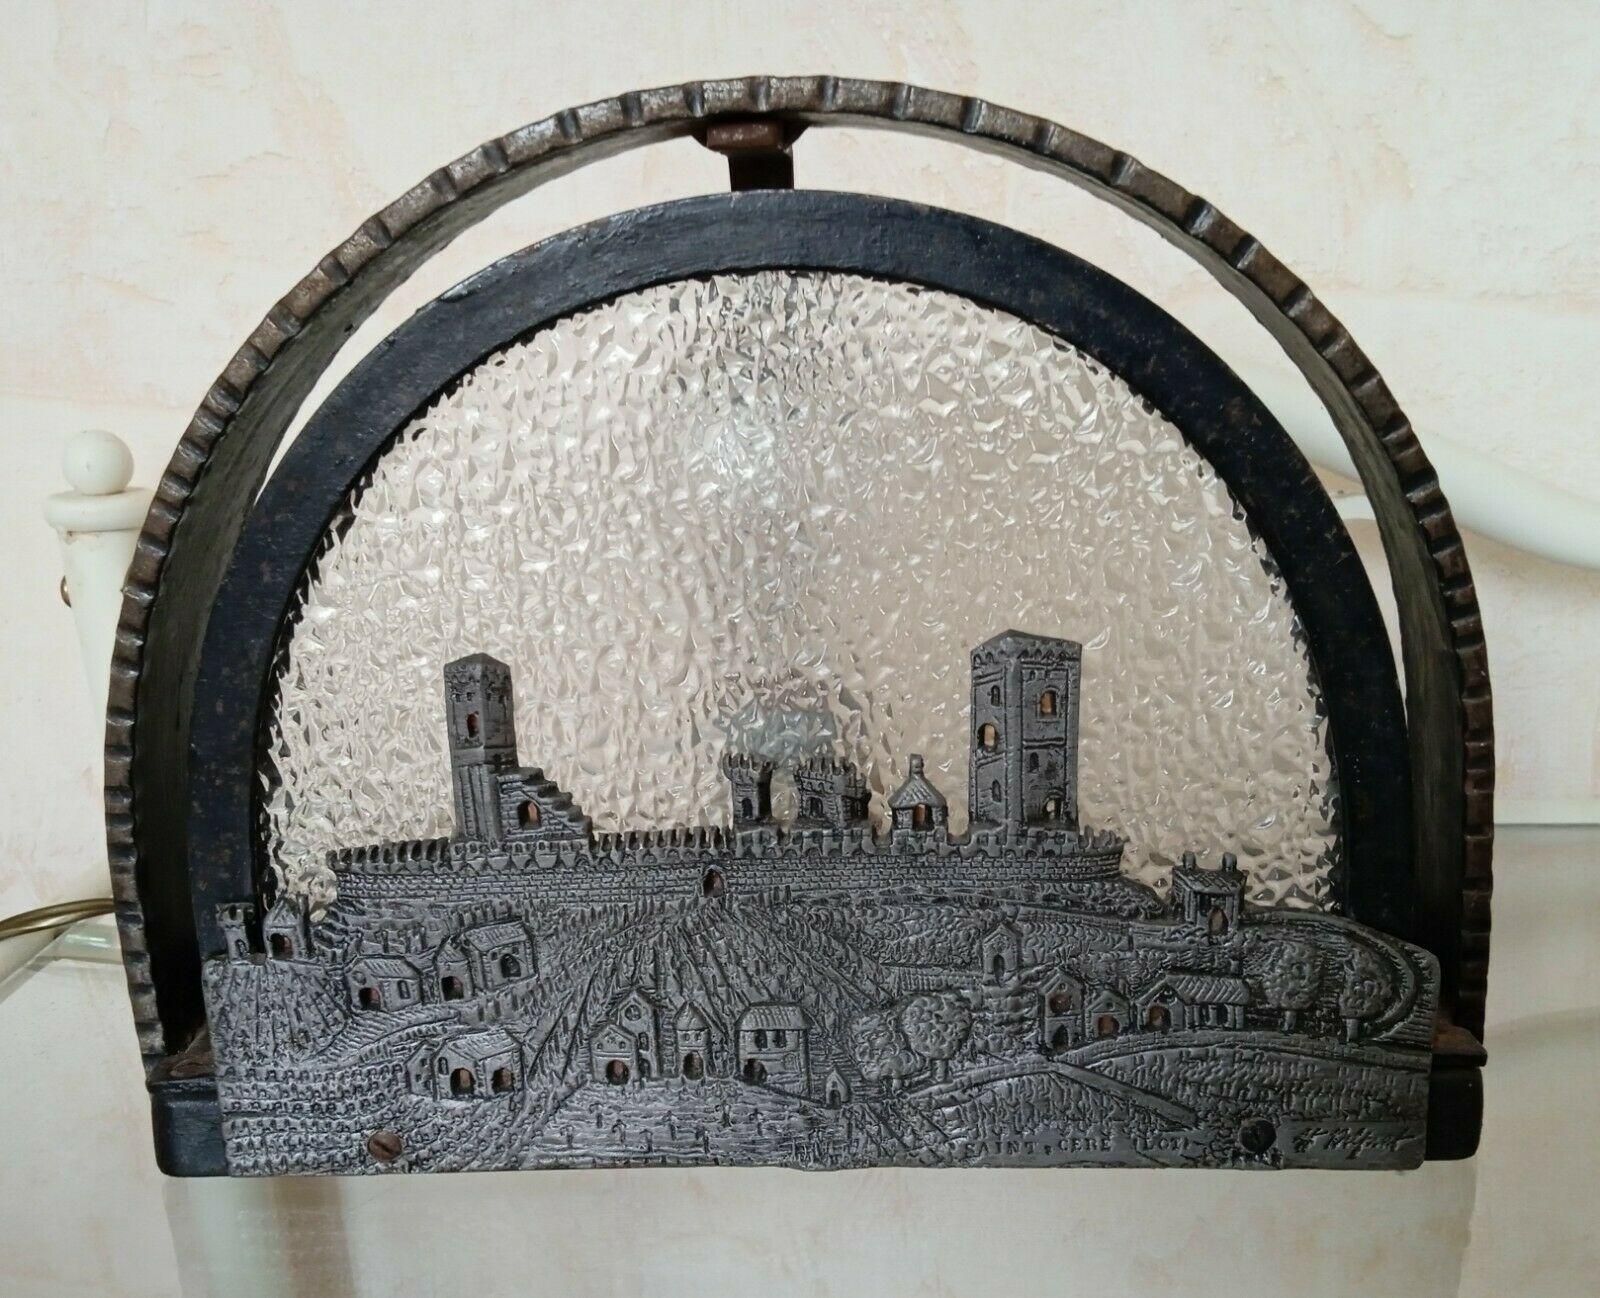 French Art Deco Wall Lamp/ Sconce of Saint Cere Castle. Made by artist H. Delprat. Frosted glass panel against a very detailed Iron Scene of Saint Cere Castle by H. Delprat